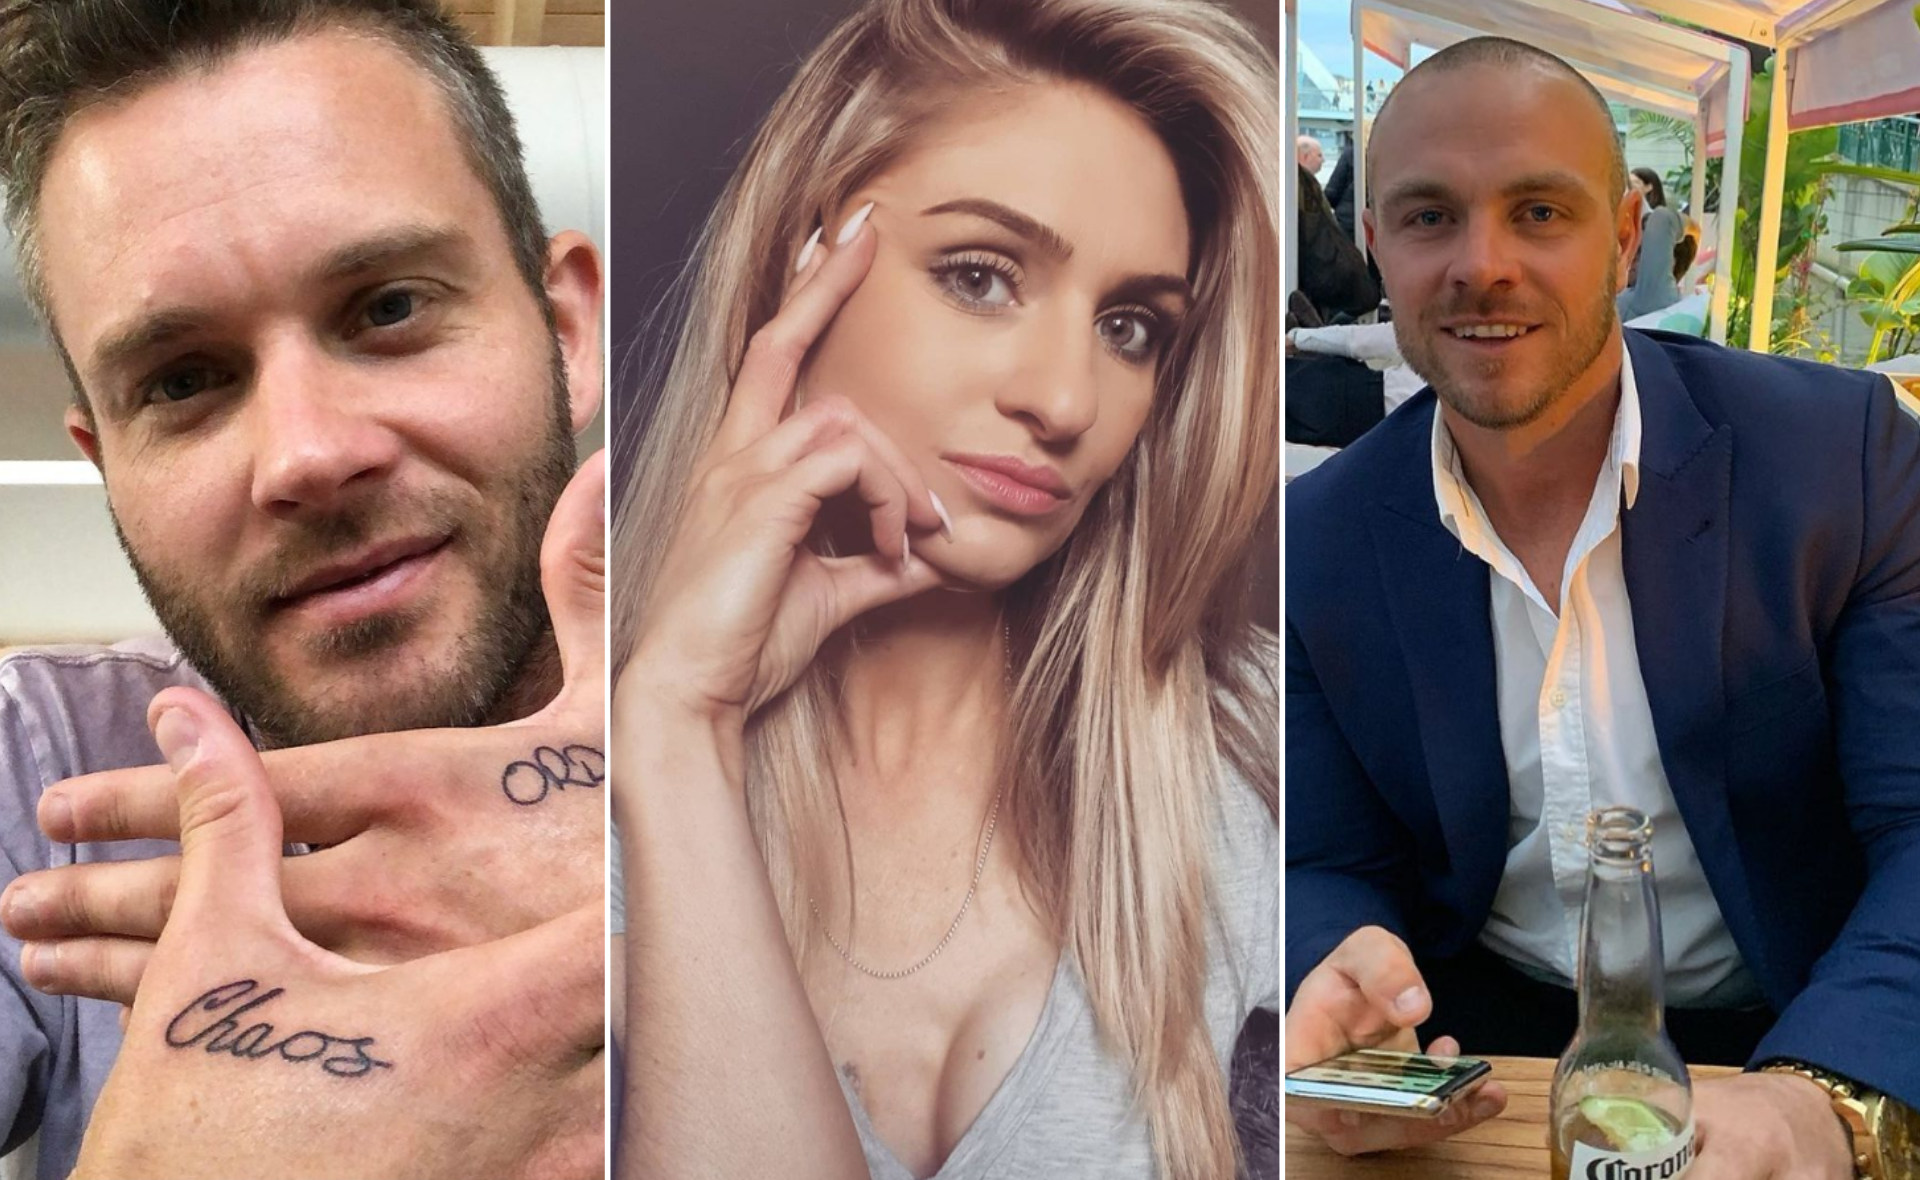 We’ve tracked down the MAFS 2021 contestants’ Instagram accounts so you can get lurking before the premiere